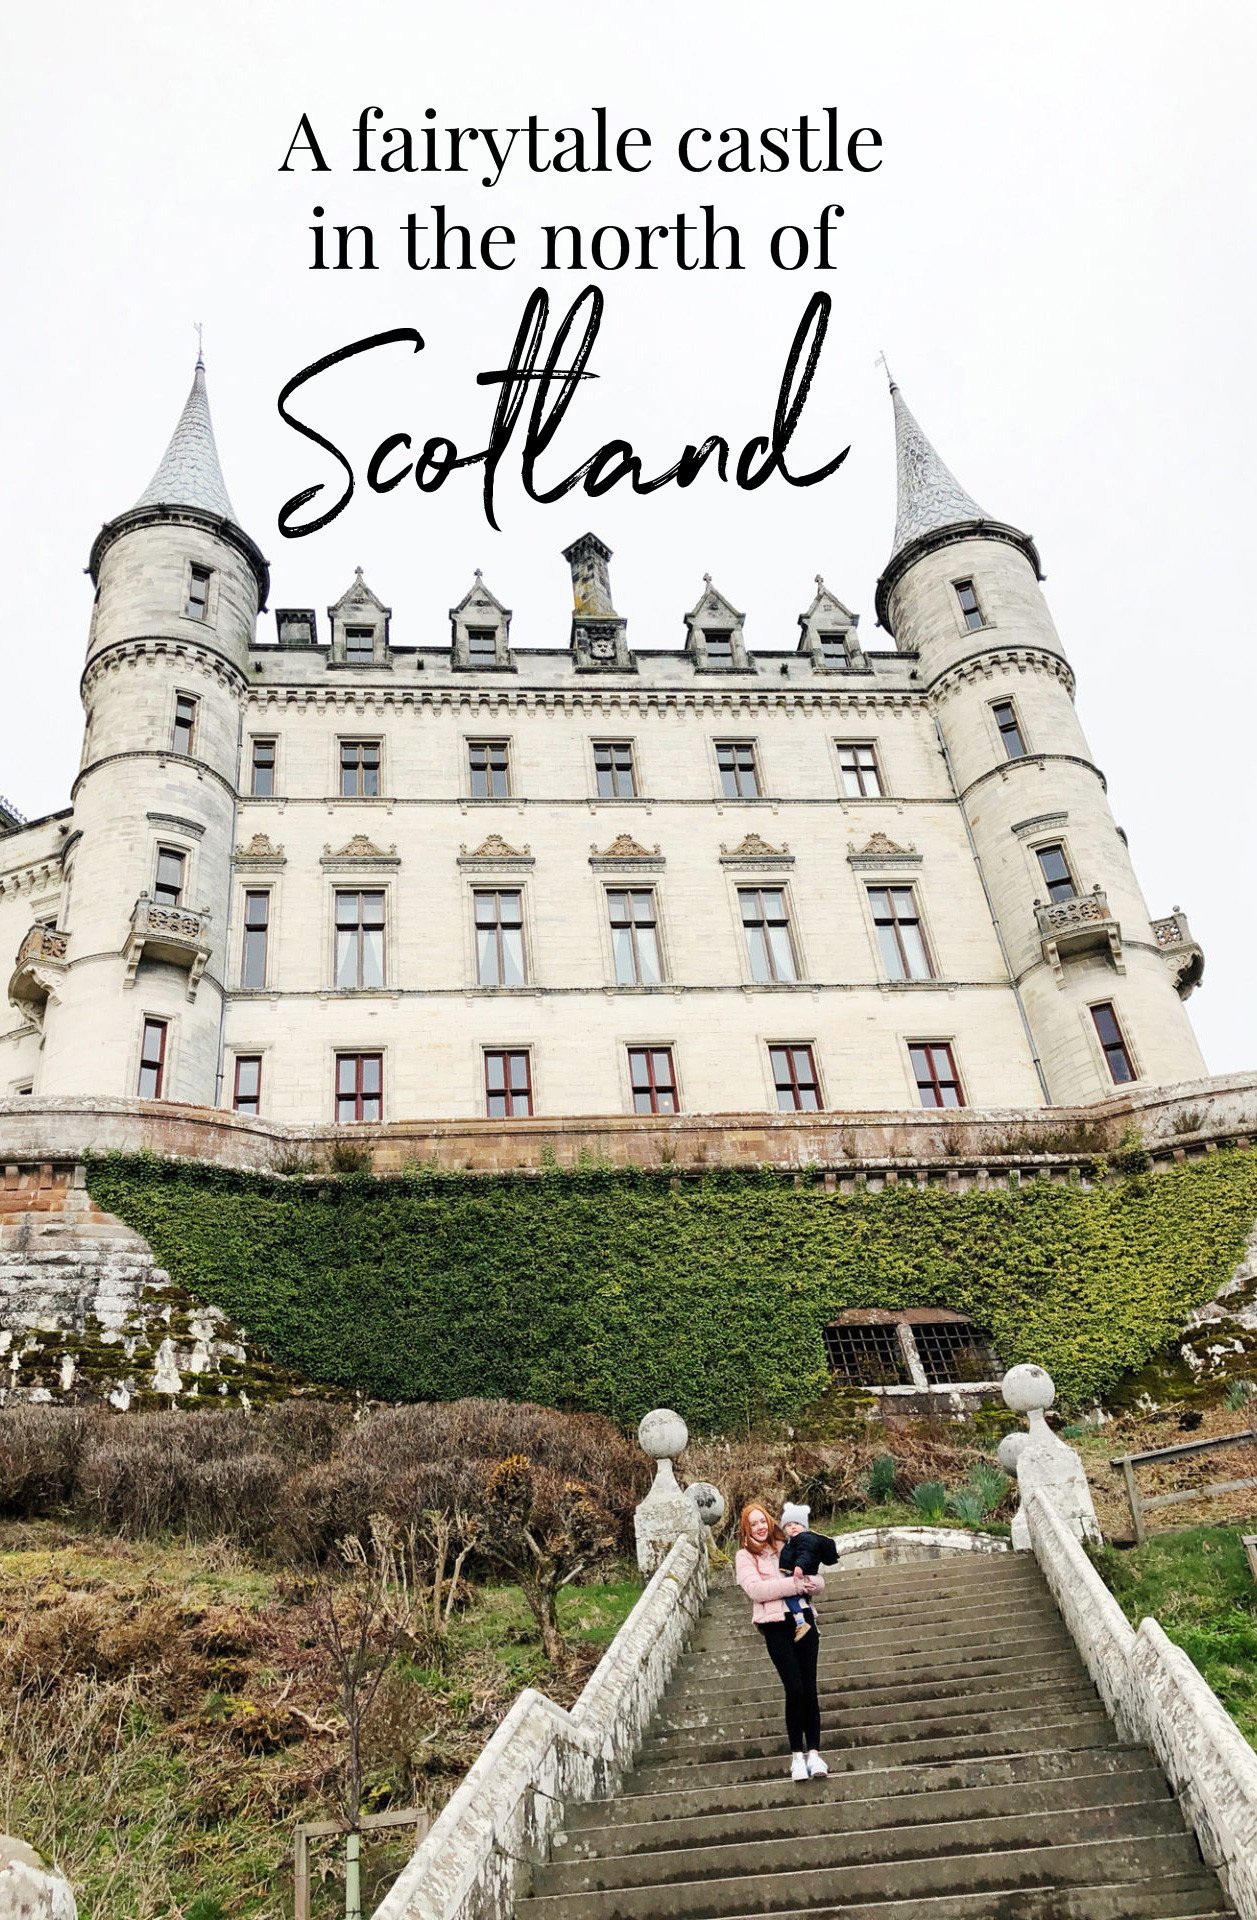 A fairytale castle in the north of Scotland: visiting Dunrobin Castle in the Scottish Highlands